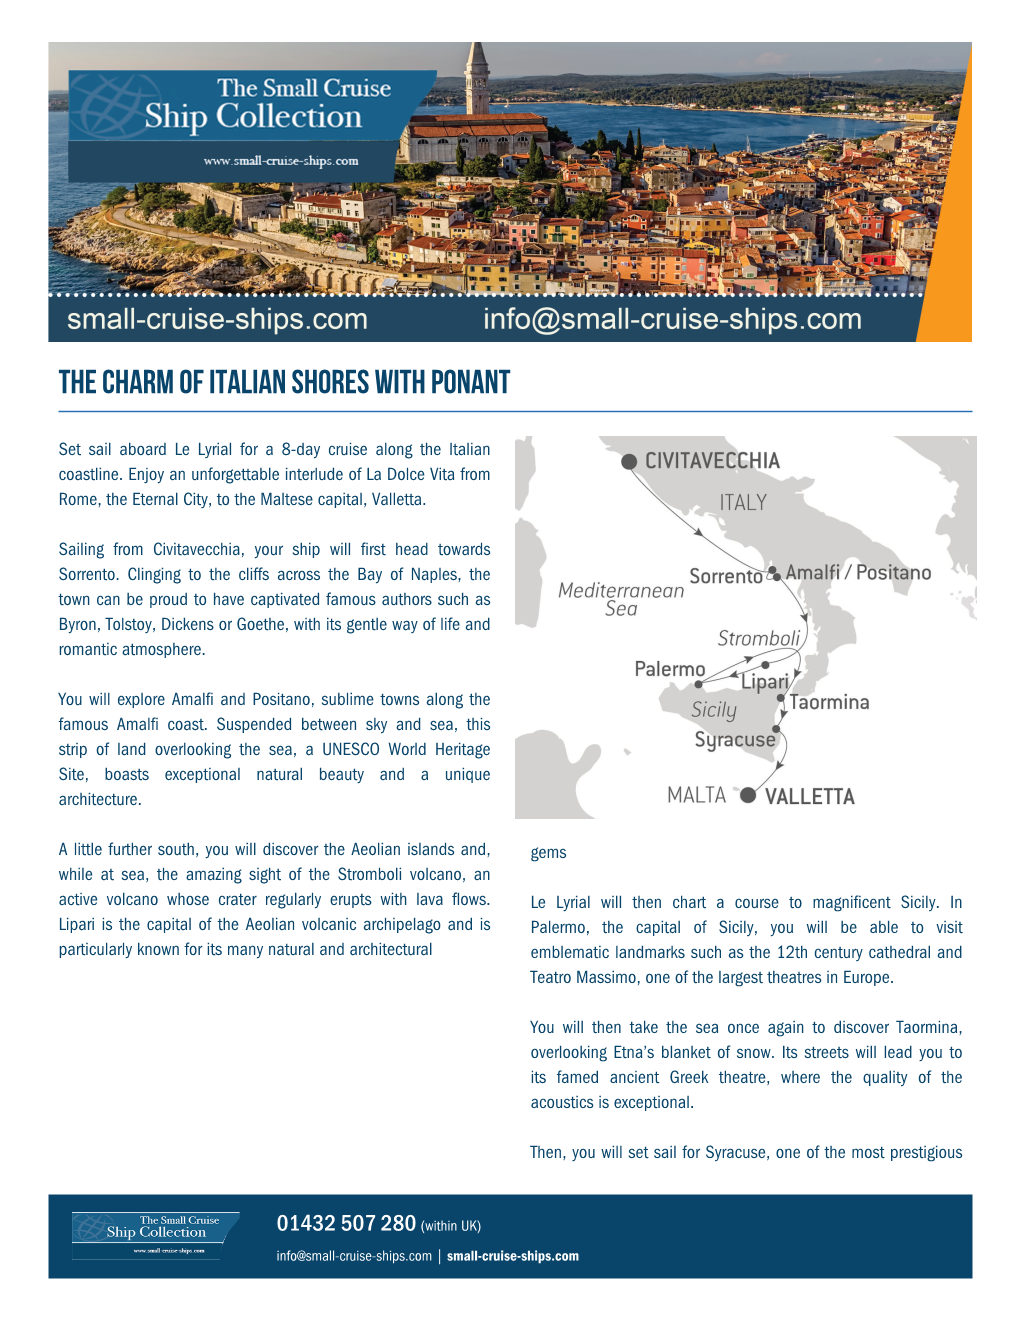 The Charm of Italian Shores with Ponant